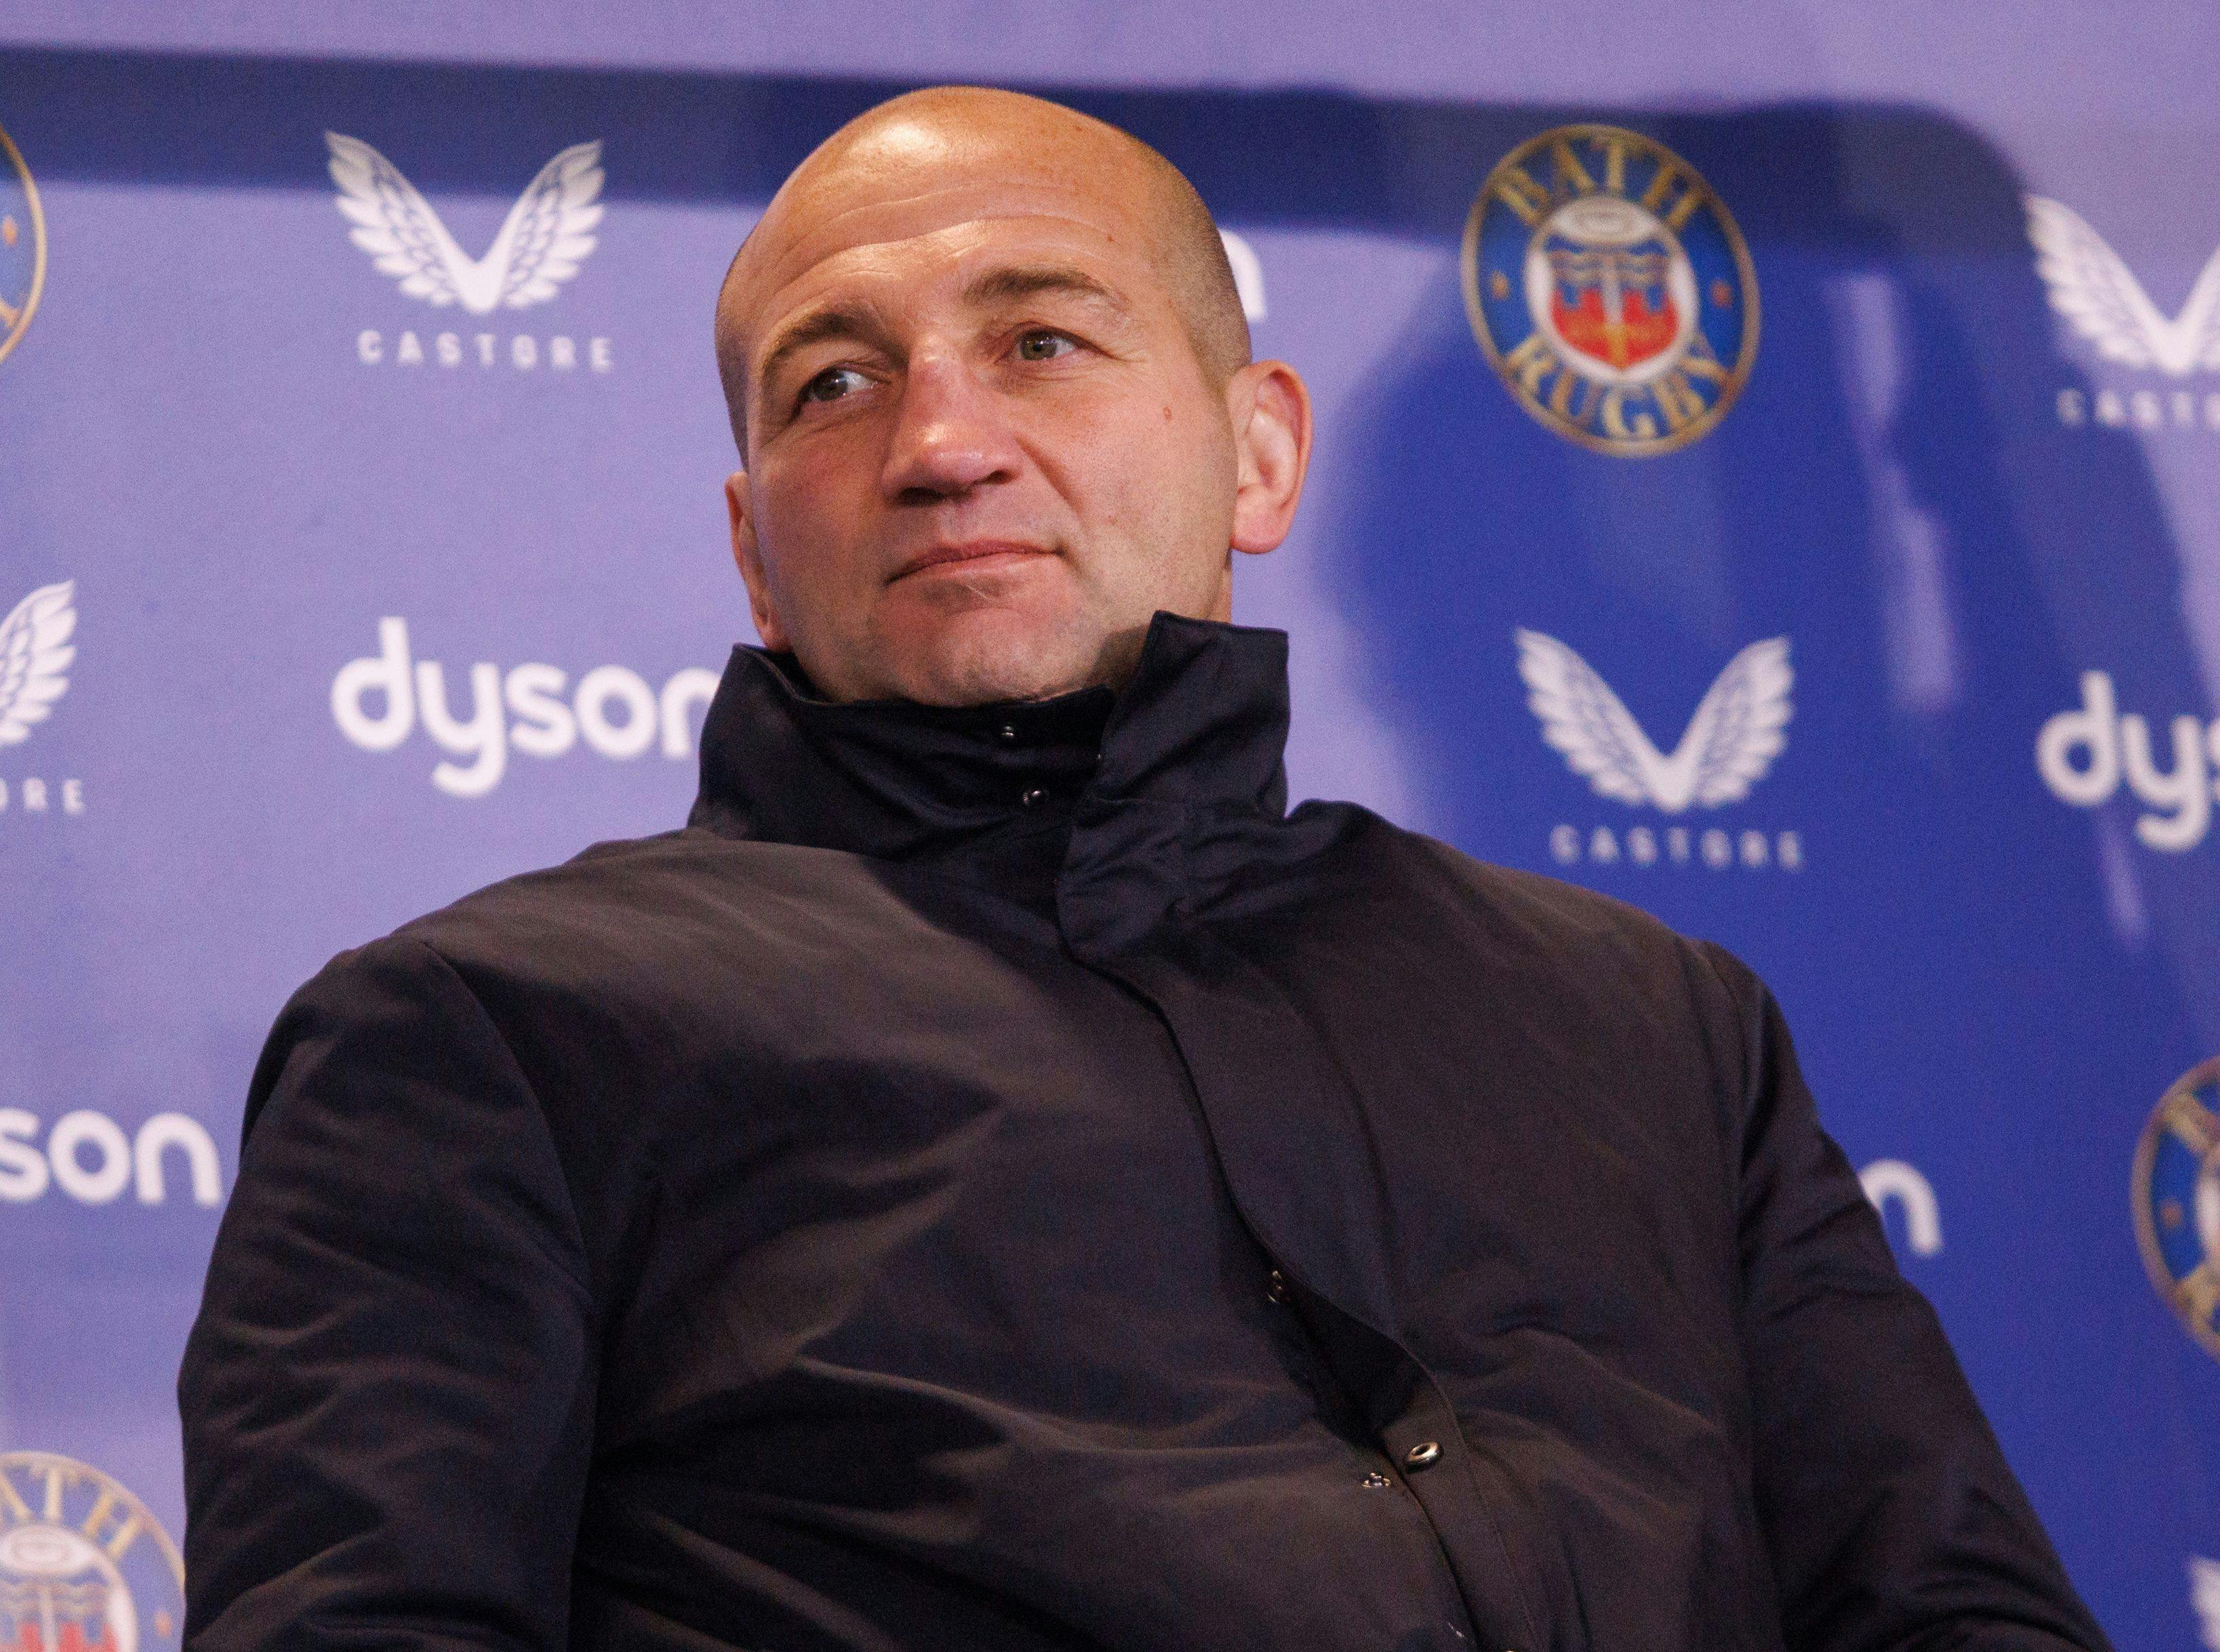 England's Head Coach Steve Borthwick during the Gallagher Premiership Rugby match between Bath Rugby and Saracens 